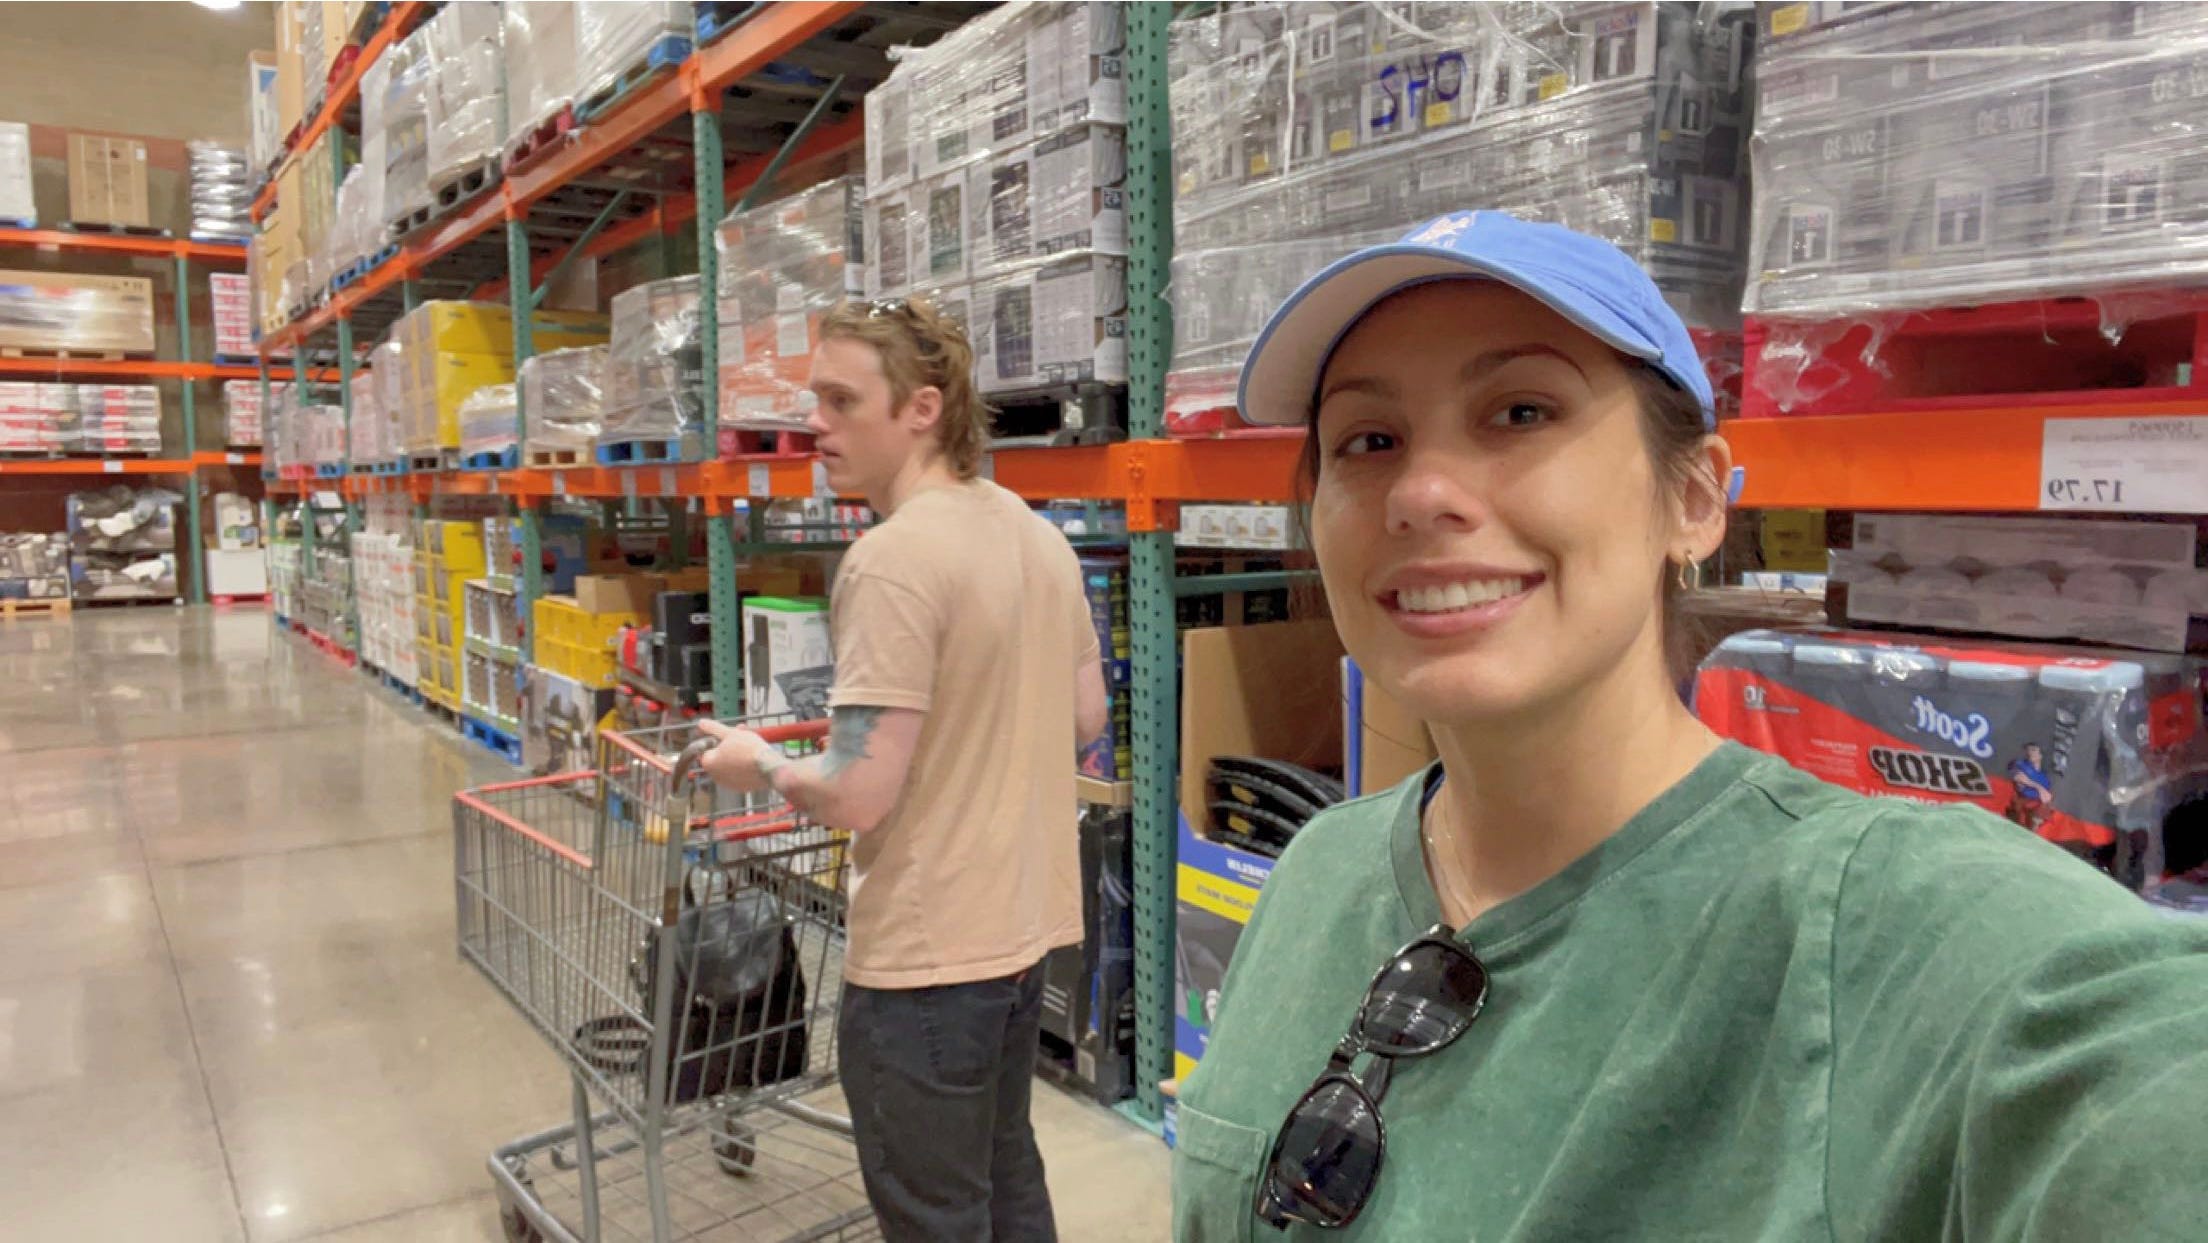 andrea valdez and brandon wells shopping in an aisle at costco